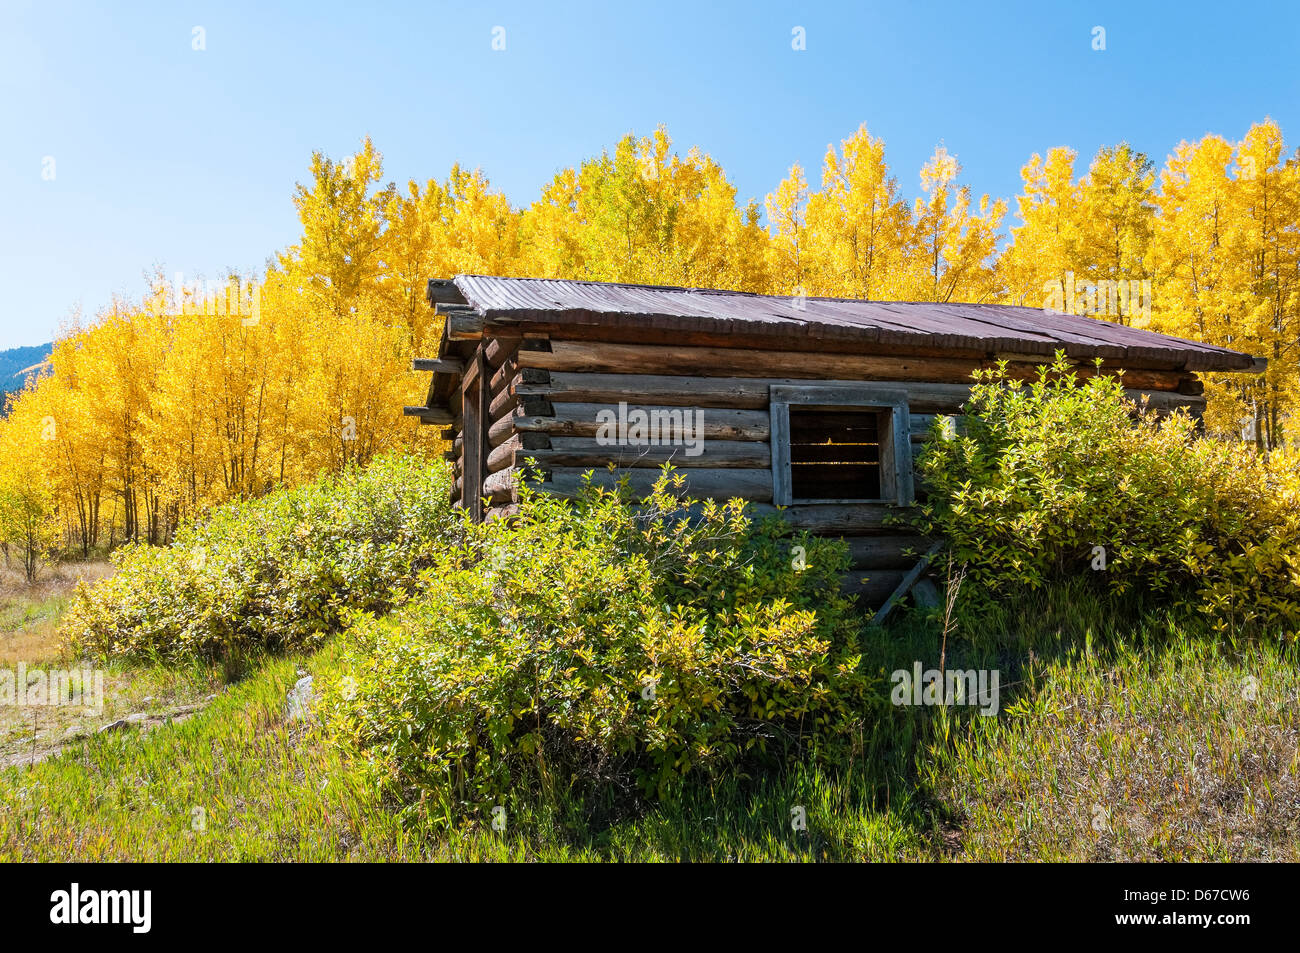 Buildings surrounded by autumn foliage, Ashcroft ghost town, Pitkin County near Aspen, Colorado. Stock Photo